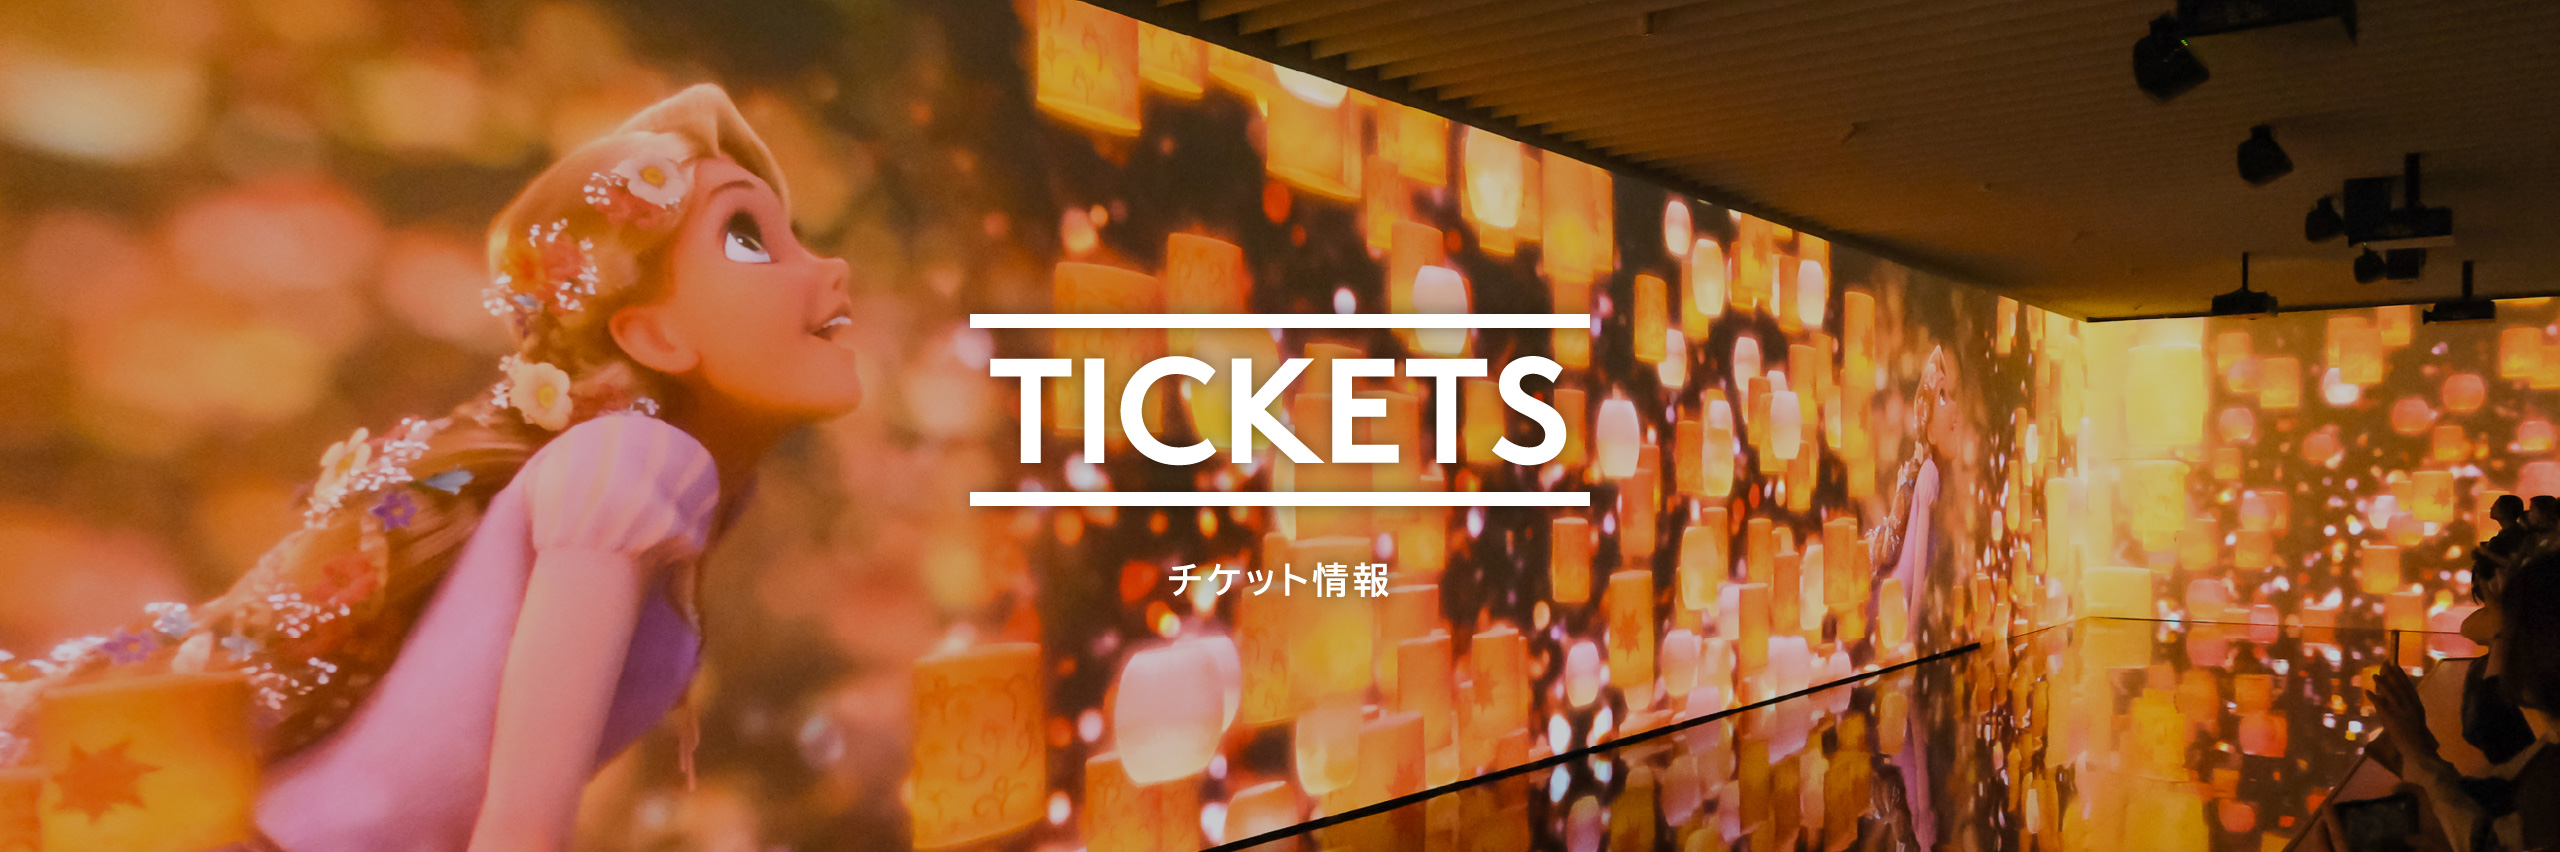 TICKETS チケット情報